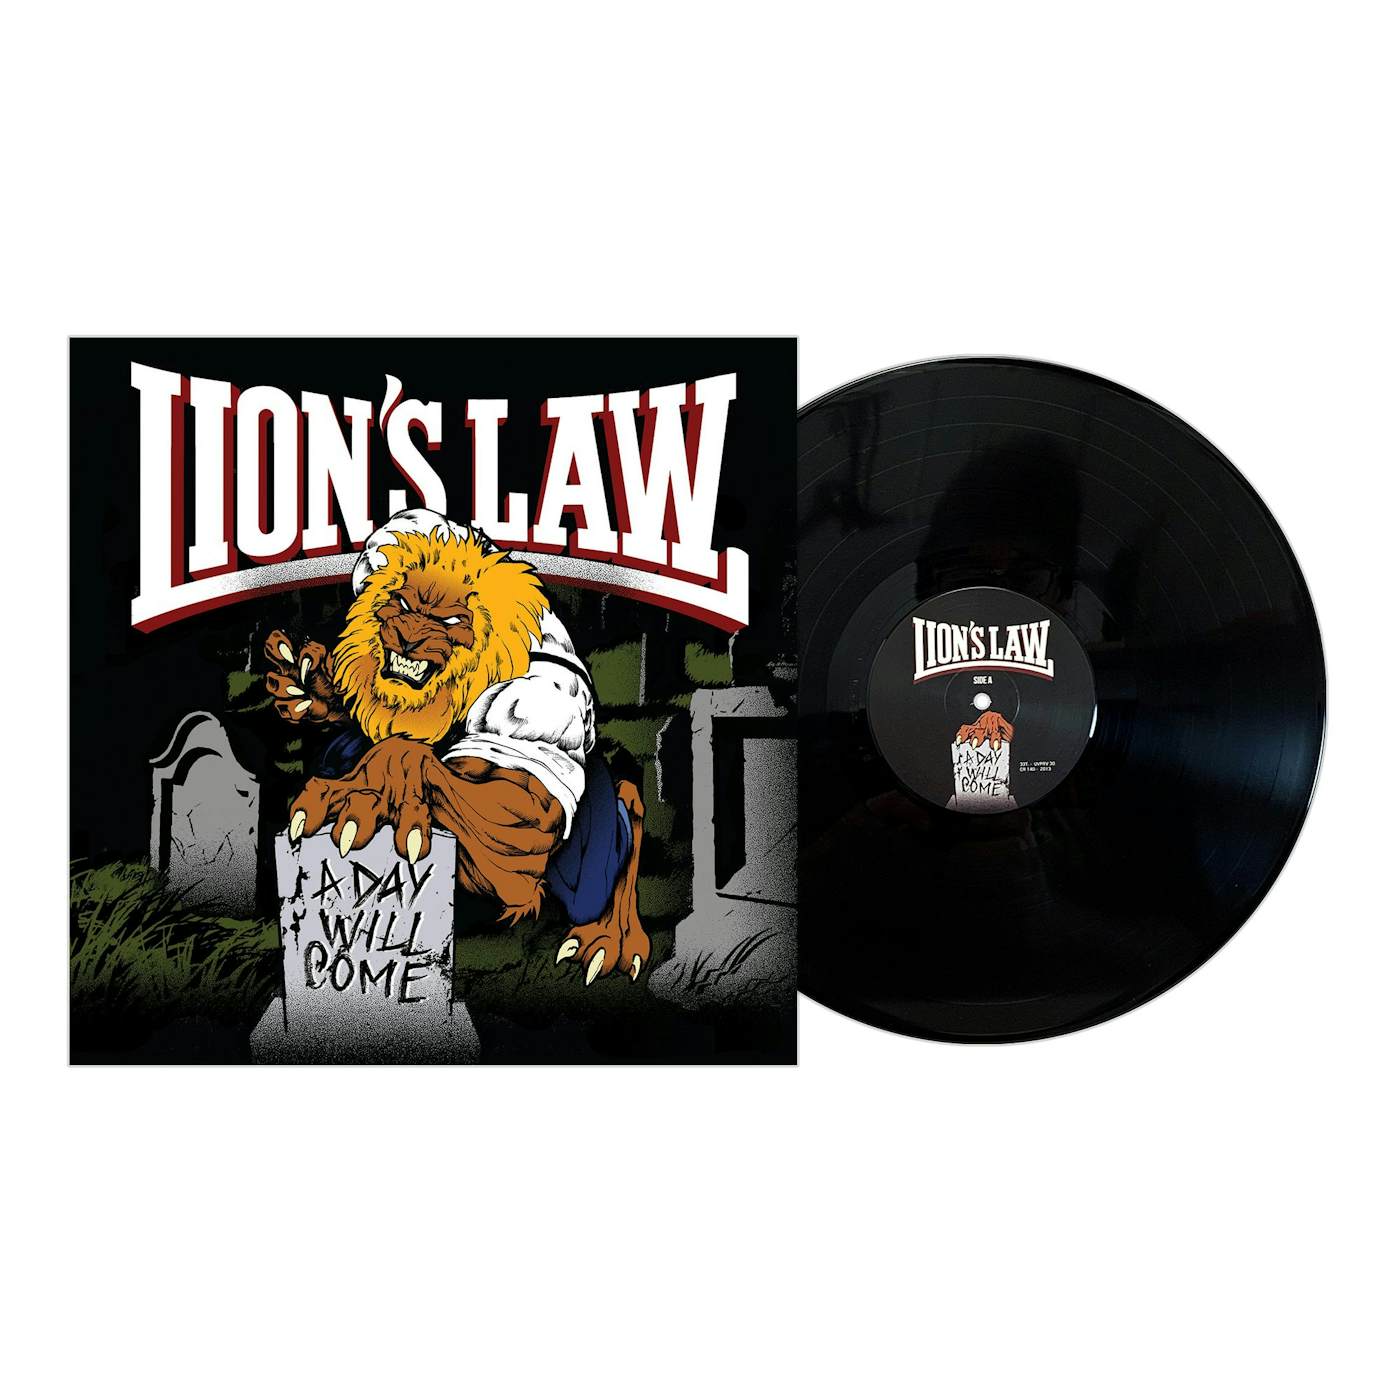 Lion's Law - A Day Will Come LP (Vinyl)